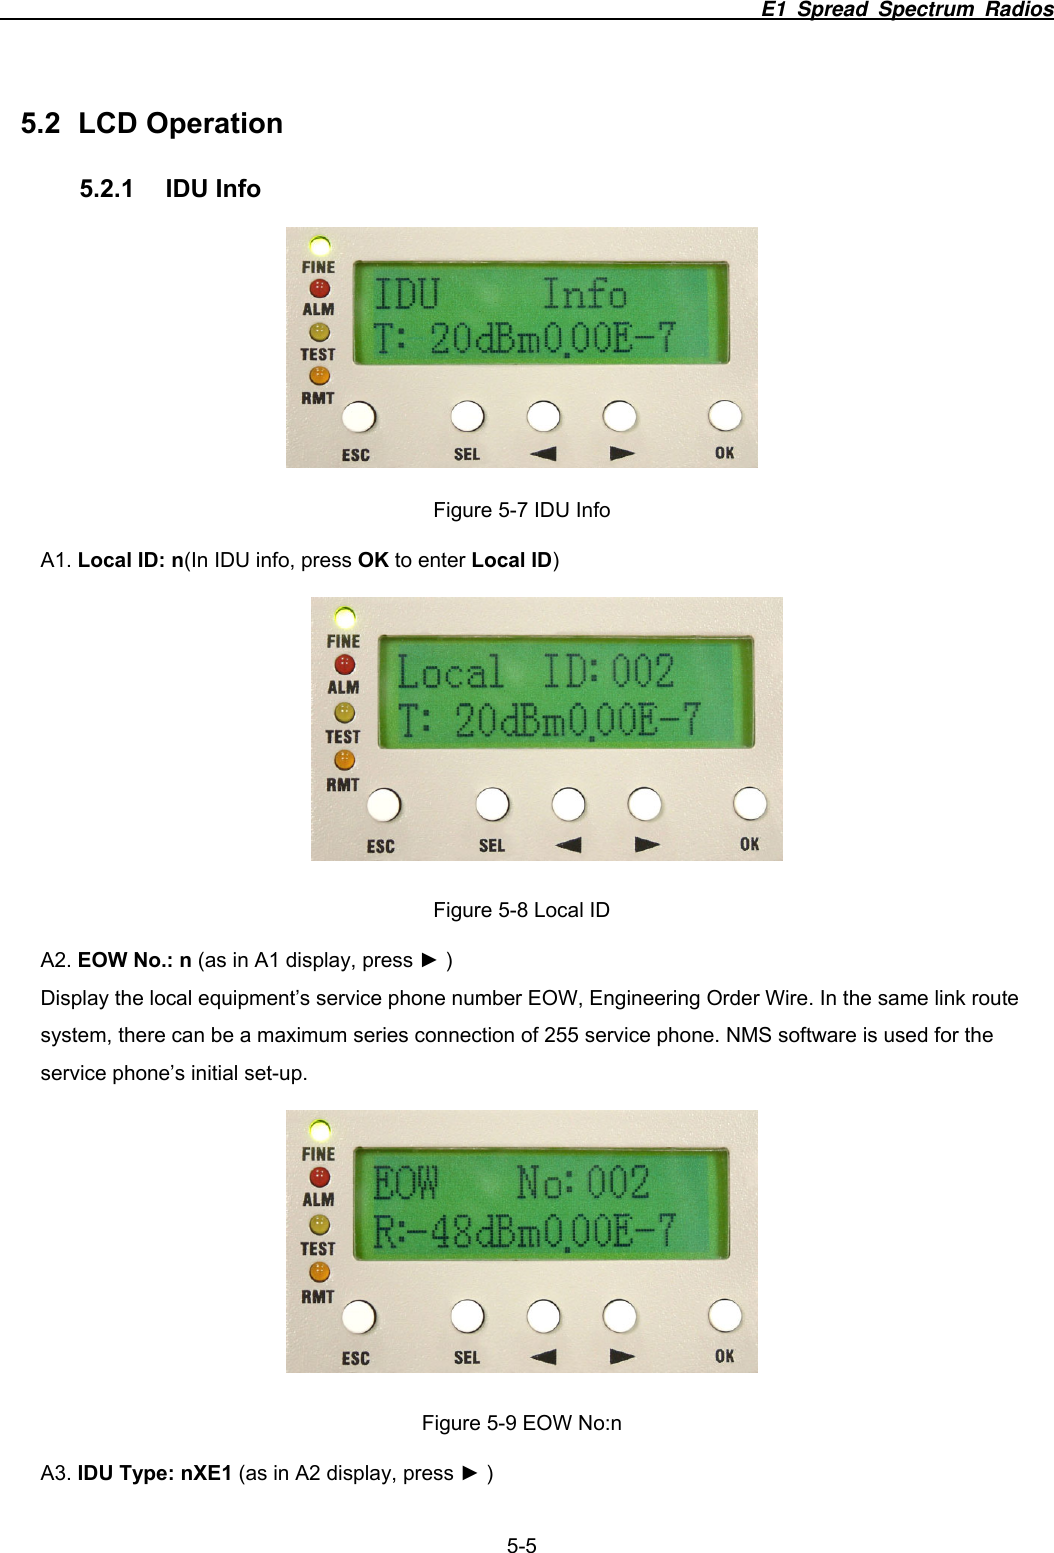                                                                          E1 Spread Spectrum Radios              5-5 5.2 LCD Operation 5.2.1 IDU Info  Figure 5-7 IDU Info A1. Local ID: n(In IDU info, press OK to enter Local ID)  Figure 5-8 Local ID A2. EOW No.: n (as in A1 display, press ► ) Display the local equipment’s service phone number EOW, Engineering Order Wire. In the same link route system, there can be a maximum series connection of 255 service phone. NMS software is used for the service phone’s initial set-up.    Figure 5-9 EOW No:n A3. IDU Type: nXE1 (as in A2 display, press ► ) 